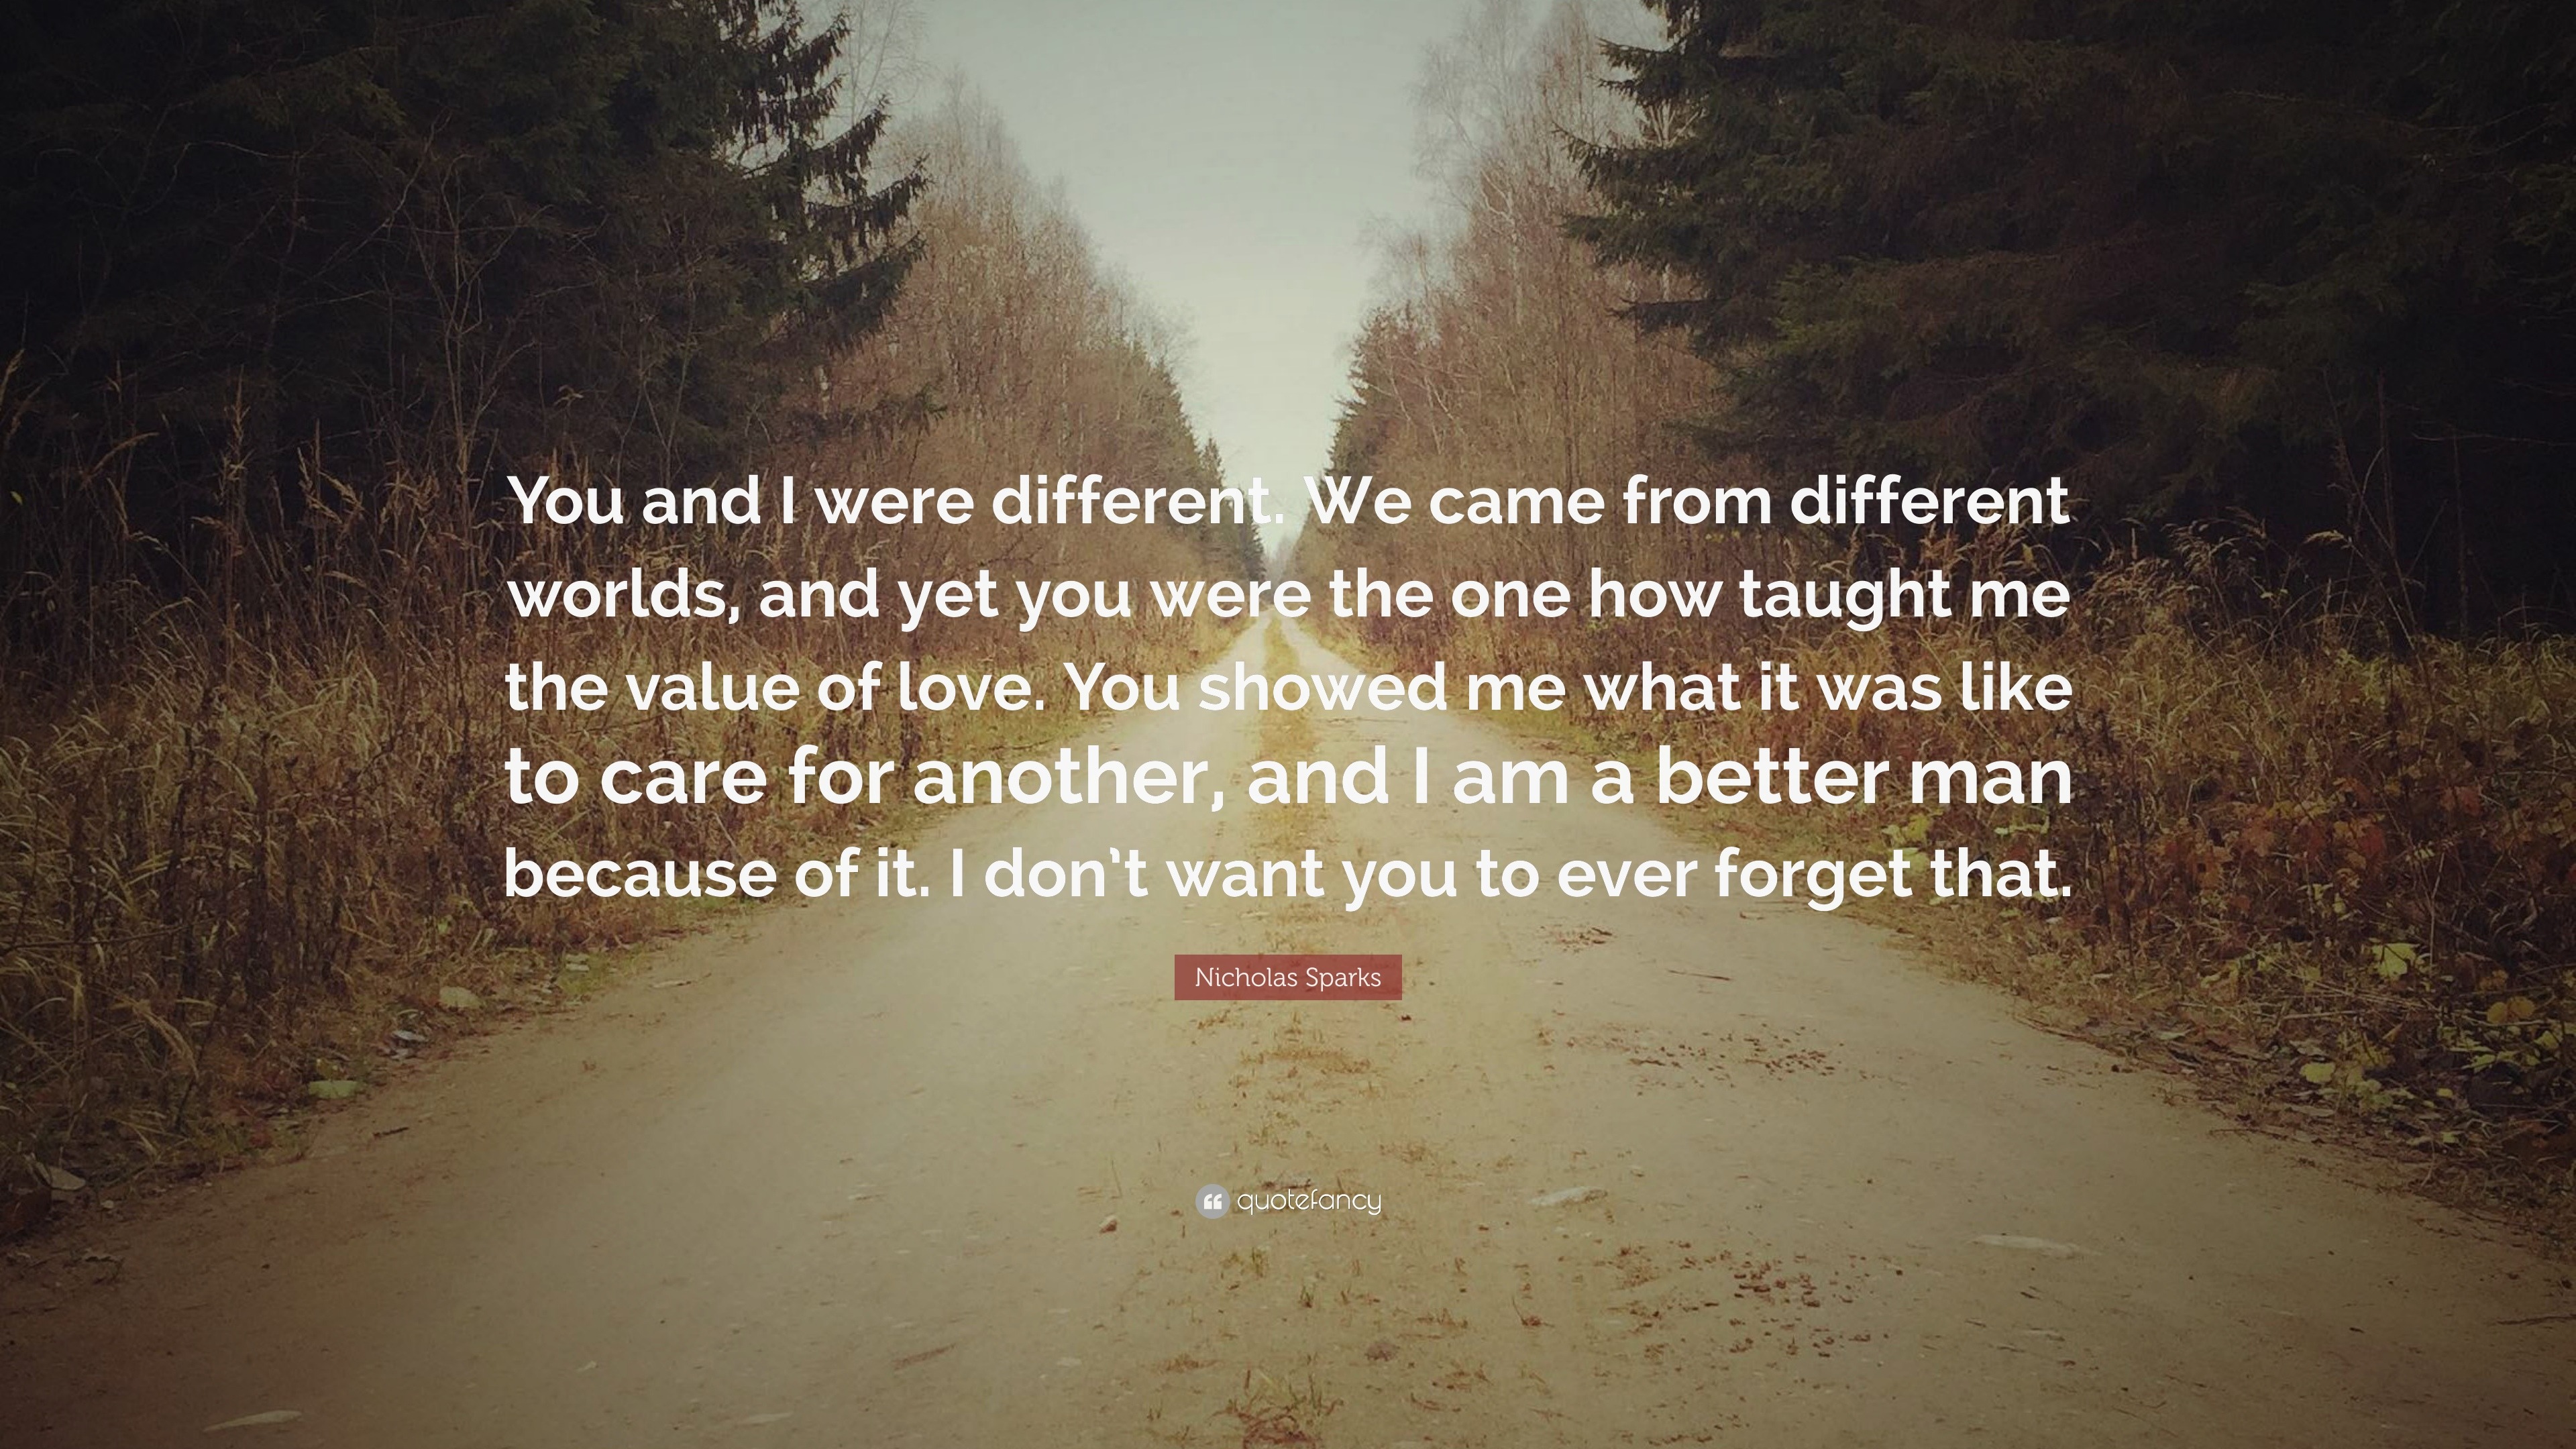 Nicholas Sparks Quote “You and I were different We came from different worlds